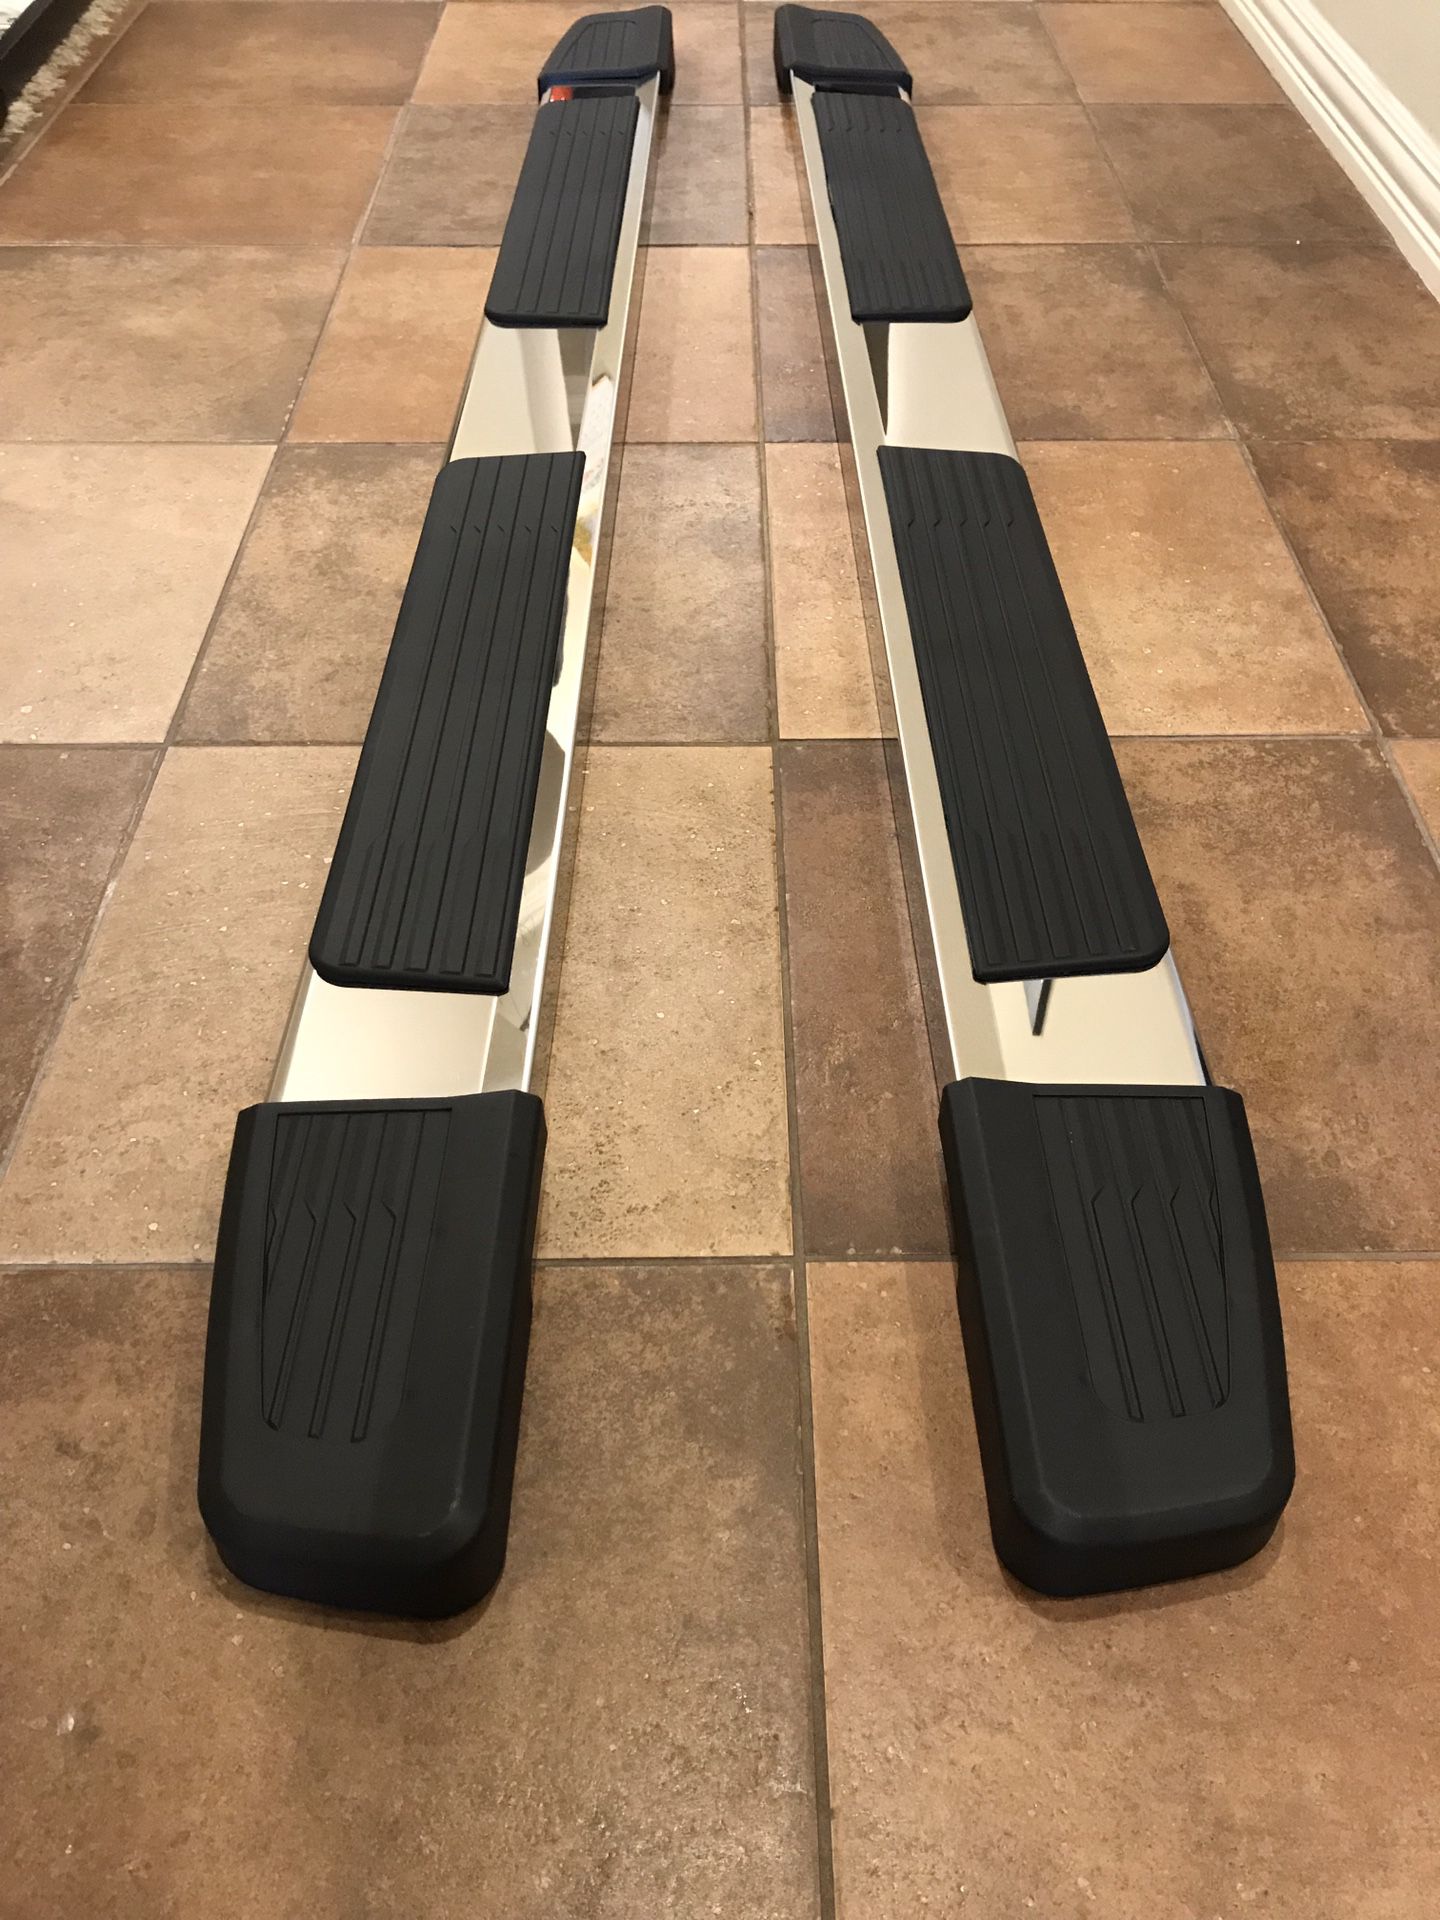 Running boards/ side step bar/ estribos. 6" wide for FORD F150/250, 2019 DODGE RAM, Nissan TITAN, Toyota TUNDRA, Chevy, GMC